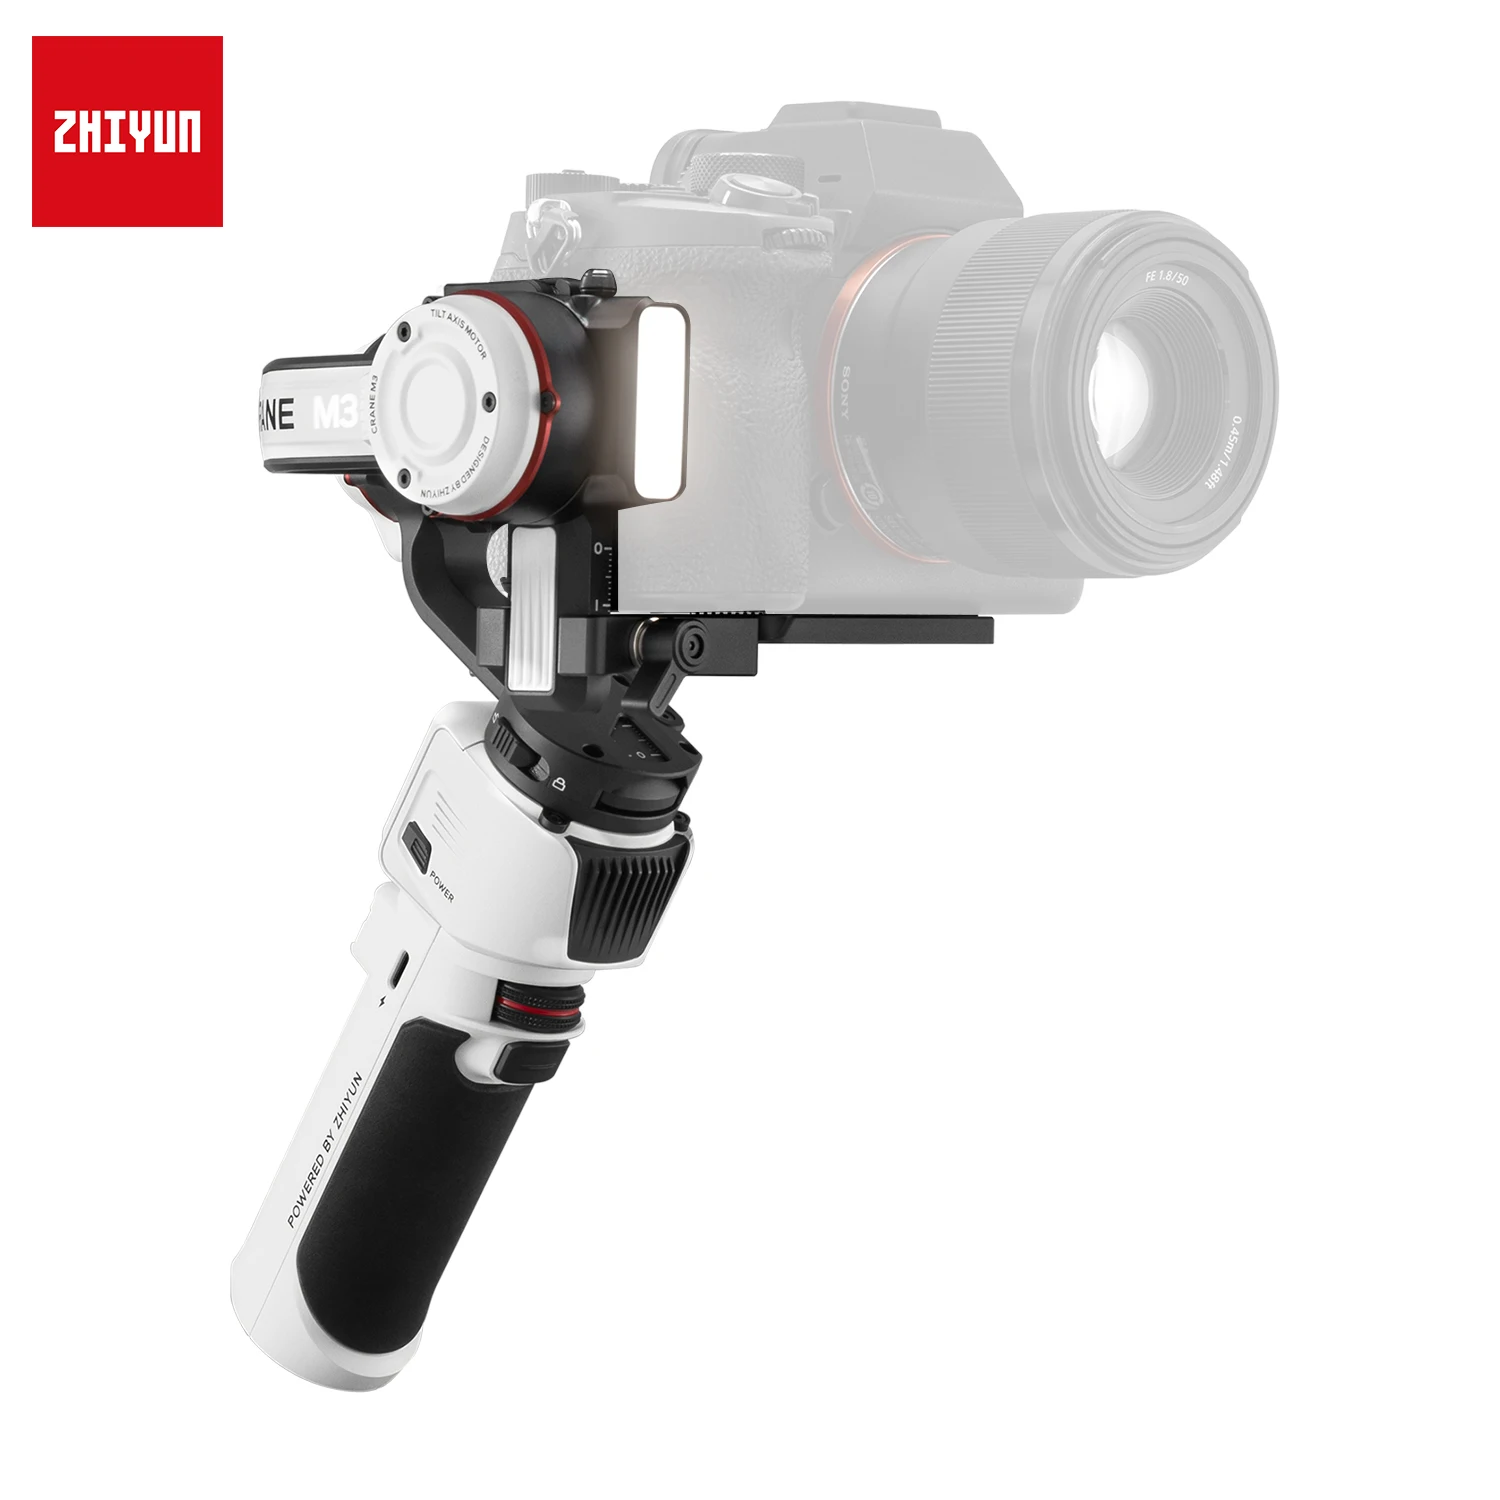 ZHIYUN Official Crane M3 3-axis Action Camera Smartphone Gimbal Handheld Stabilizer for Mirrorless Cameras for Sony/Canon/iPhone